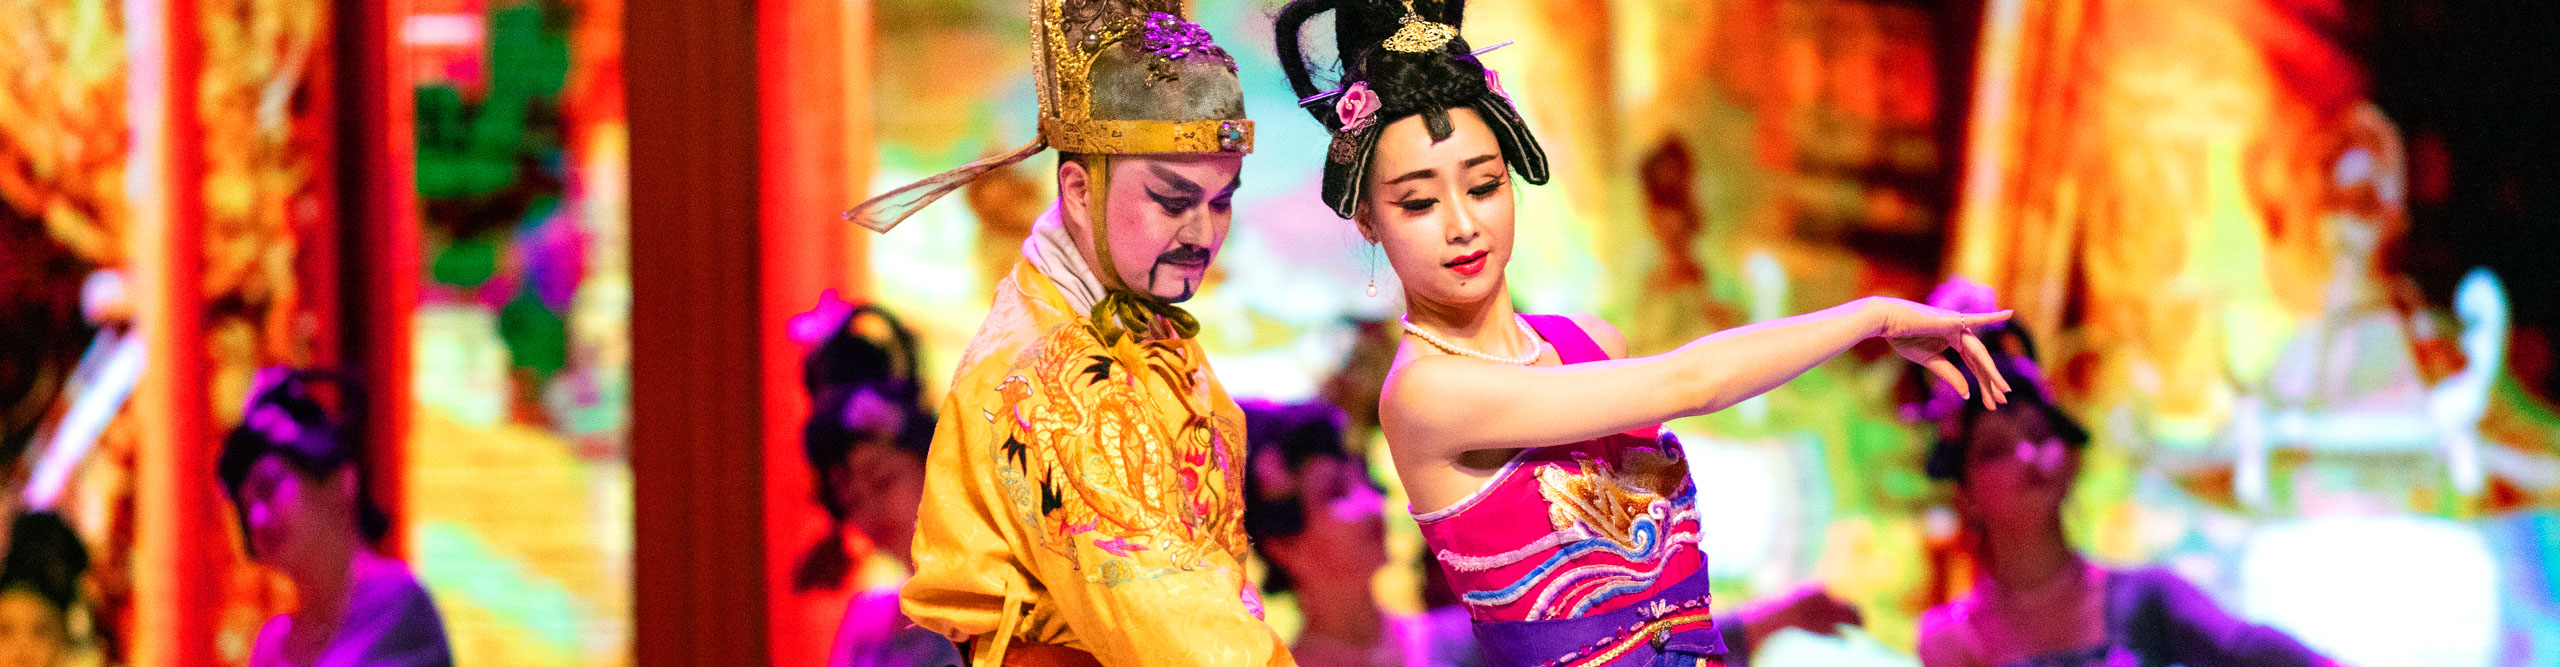 Dancers on stage performing the Tang Dynasty sow in China 